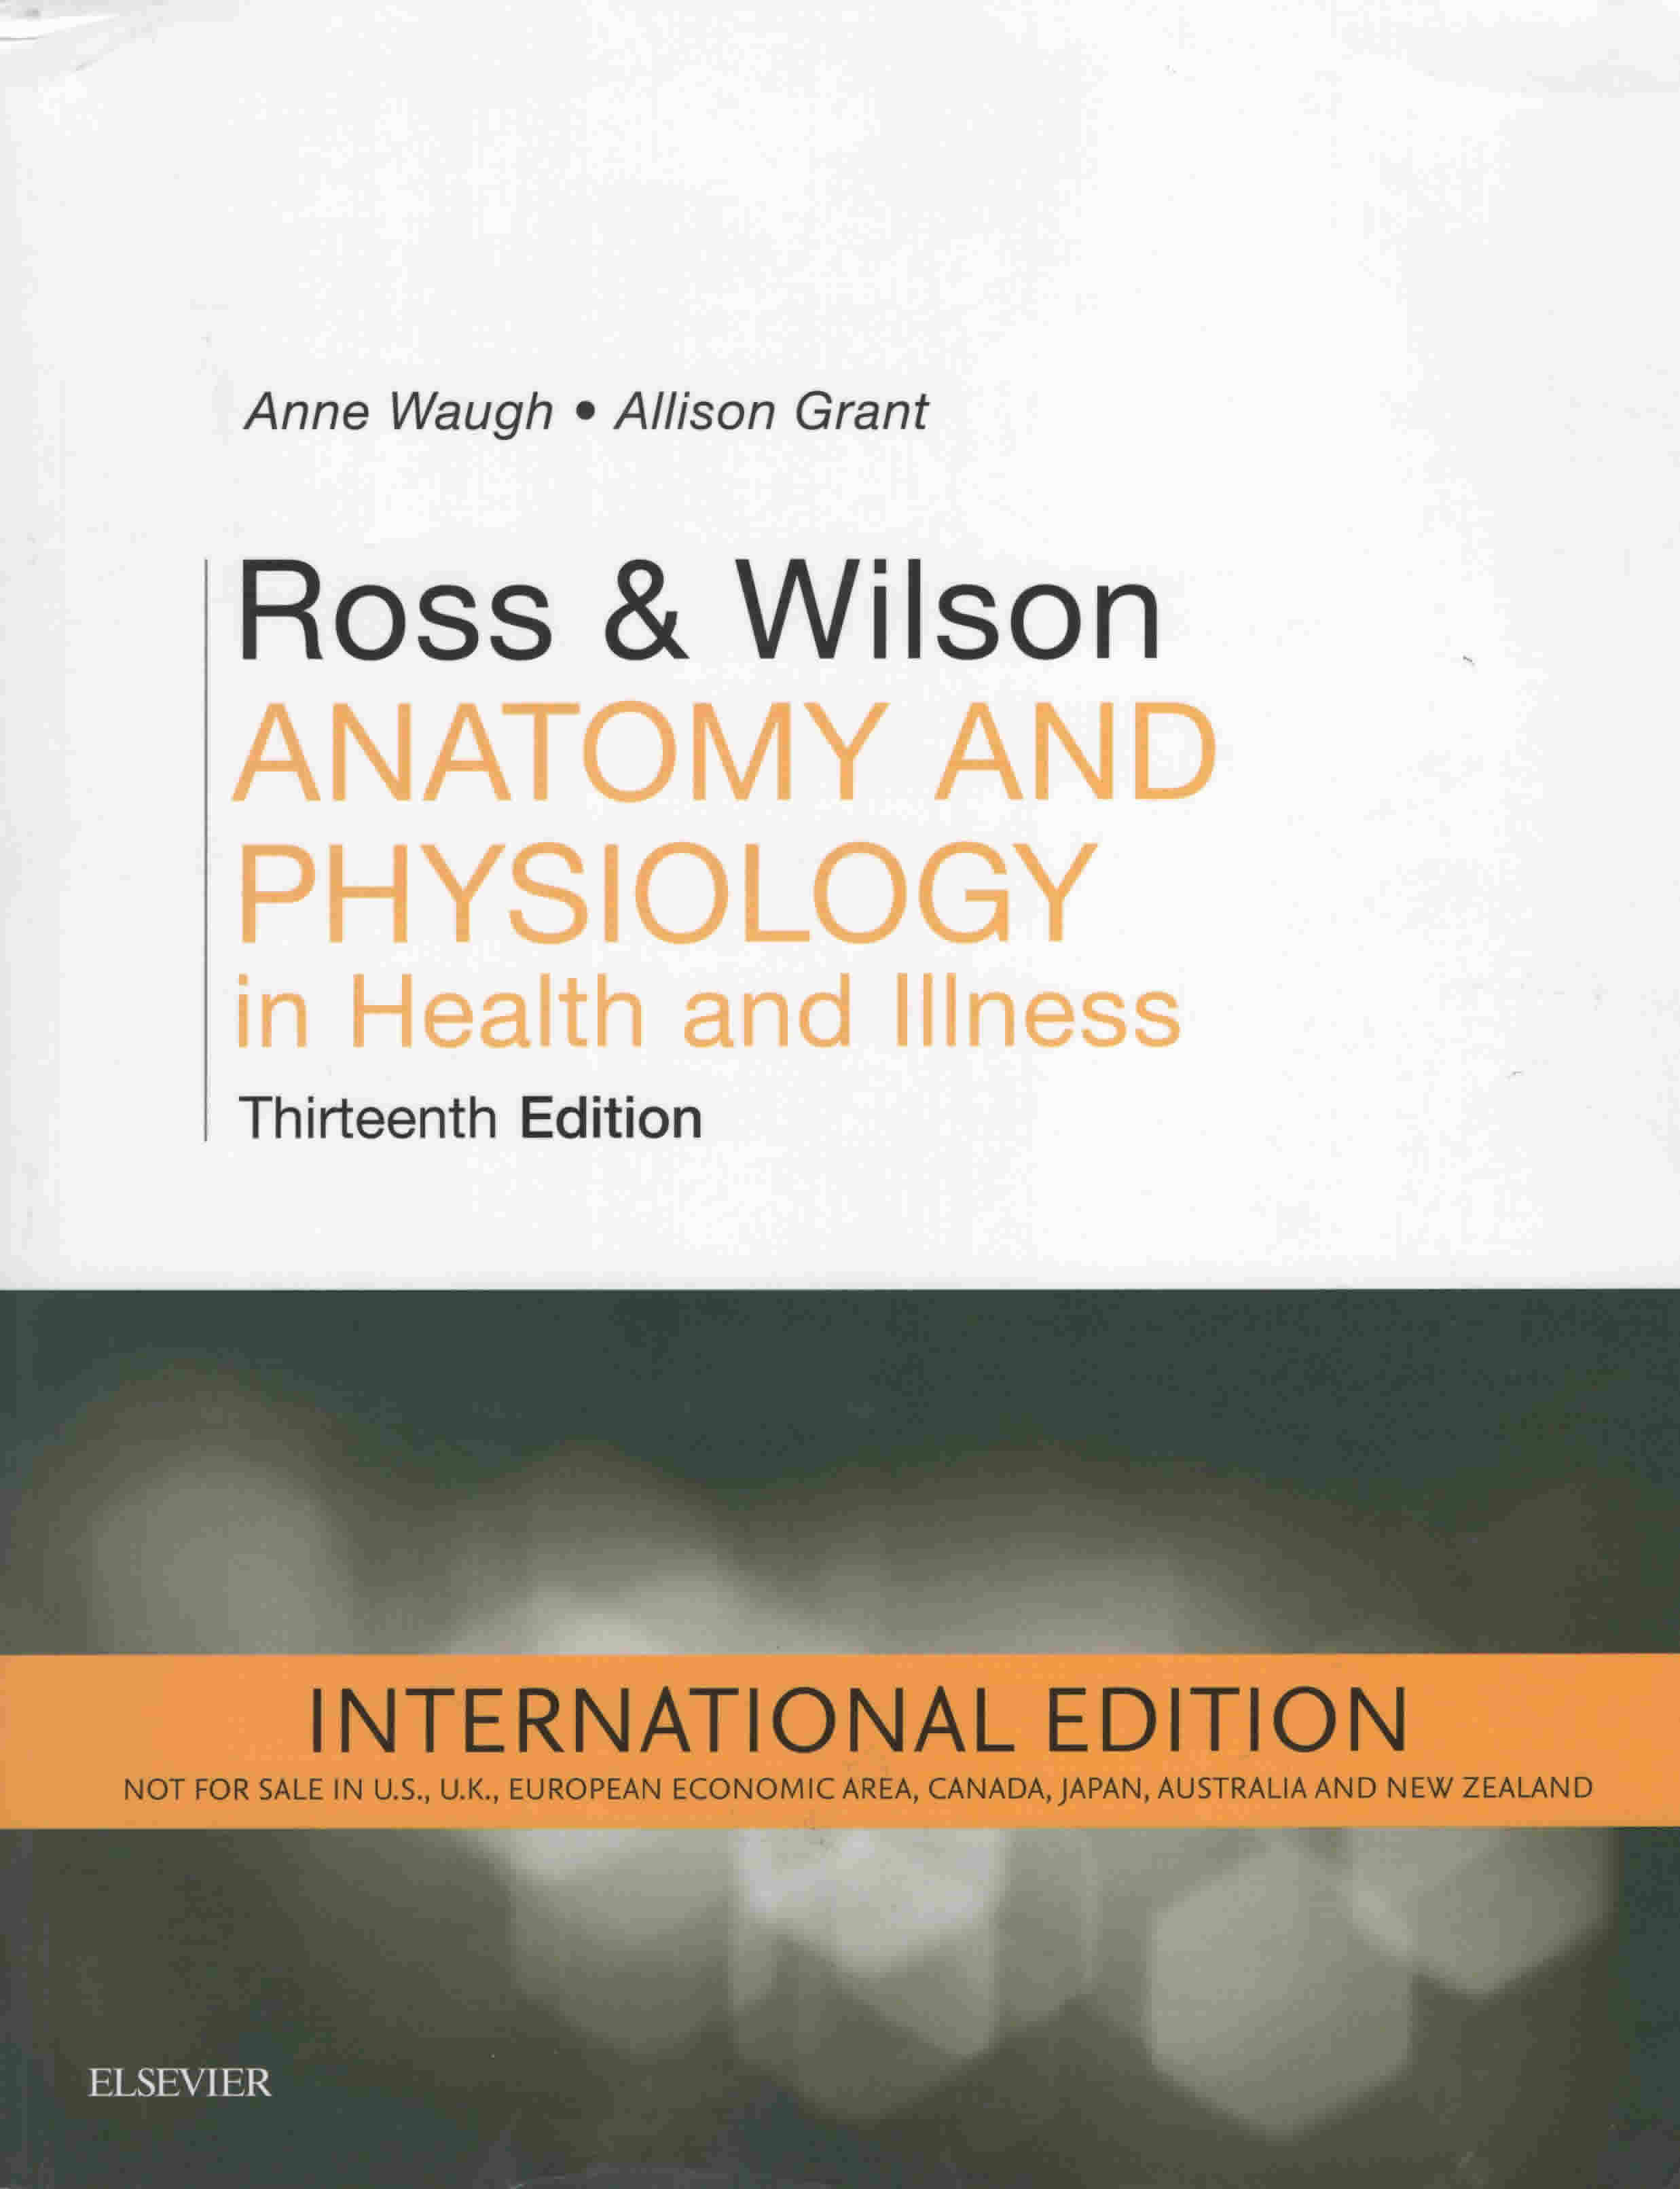 ROSS AND WILSON ANATOMY AND PHYSIOLOGY IN HEALTH AND ILLNESS - 13TH